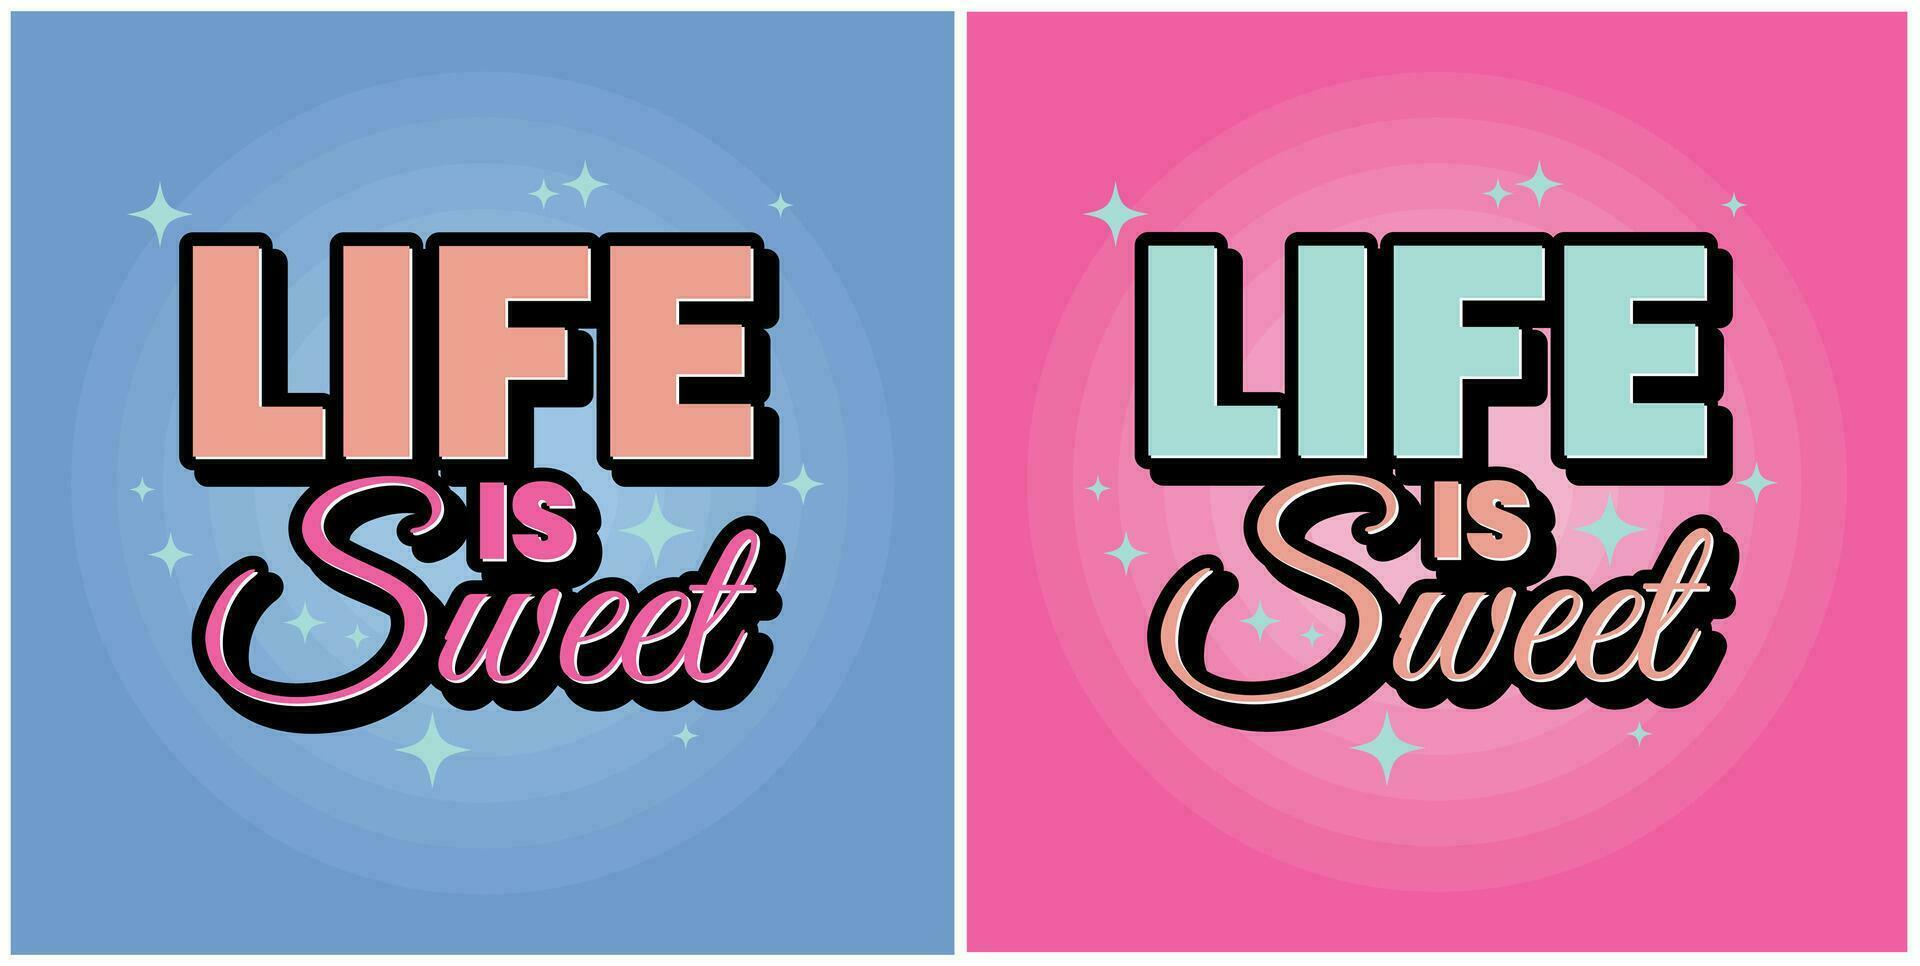 Life is sweet cute pink blue girl banner poster design vector